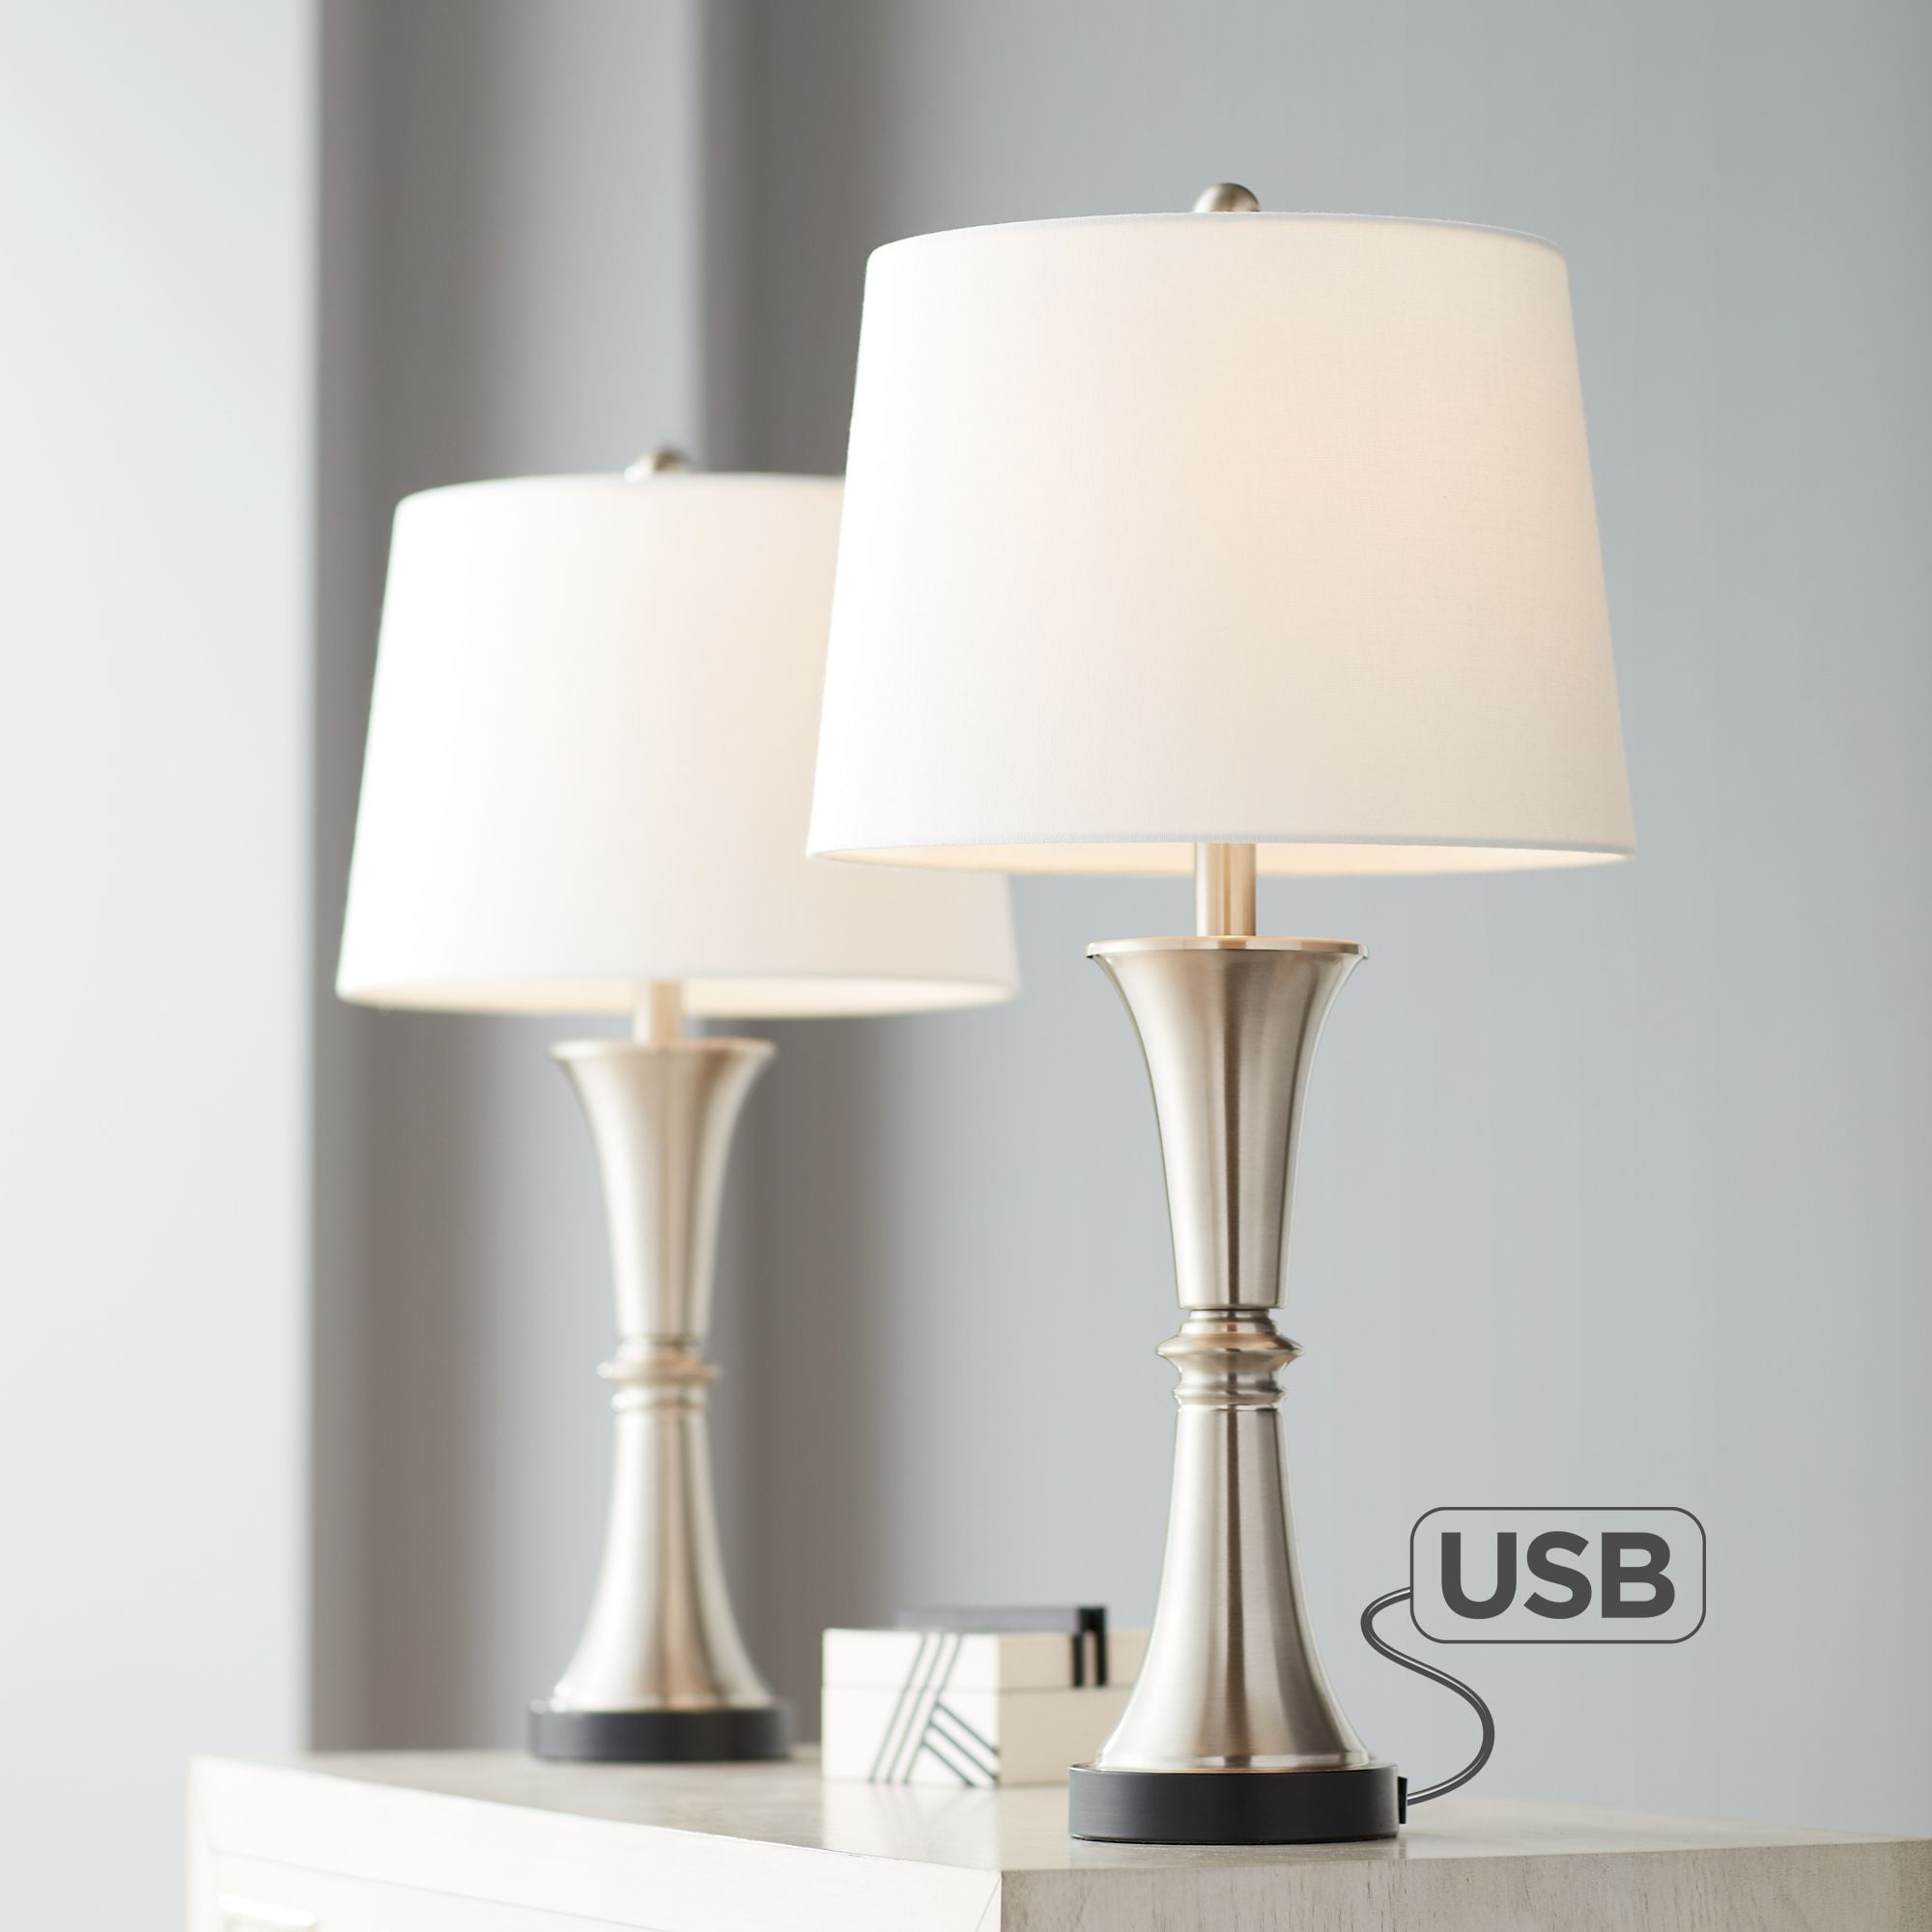 360 Lighting Modern Table Lamps Set Of 2 With Usb Port Led Touch